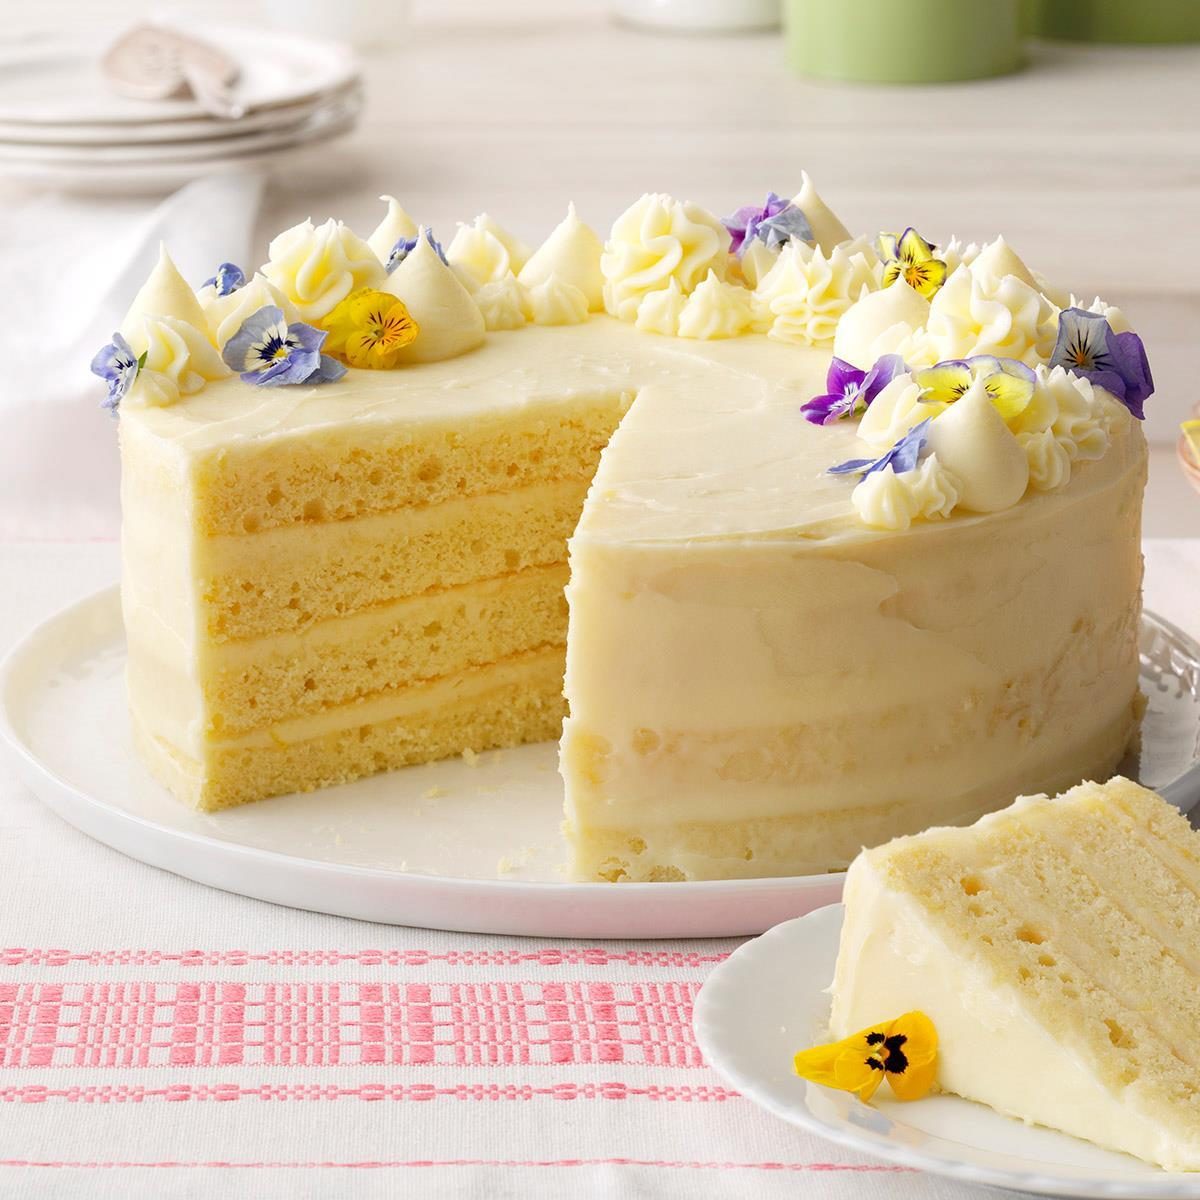 5 Tips for the Perfect Layer Cake